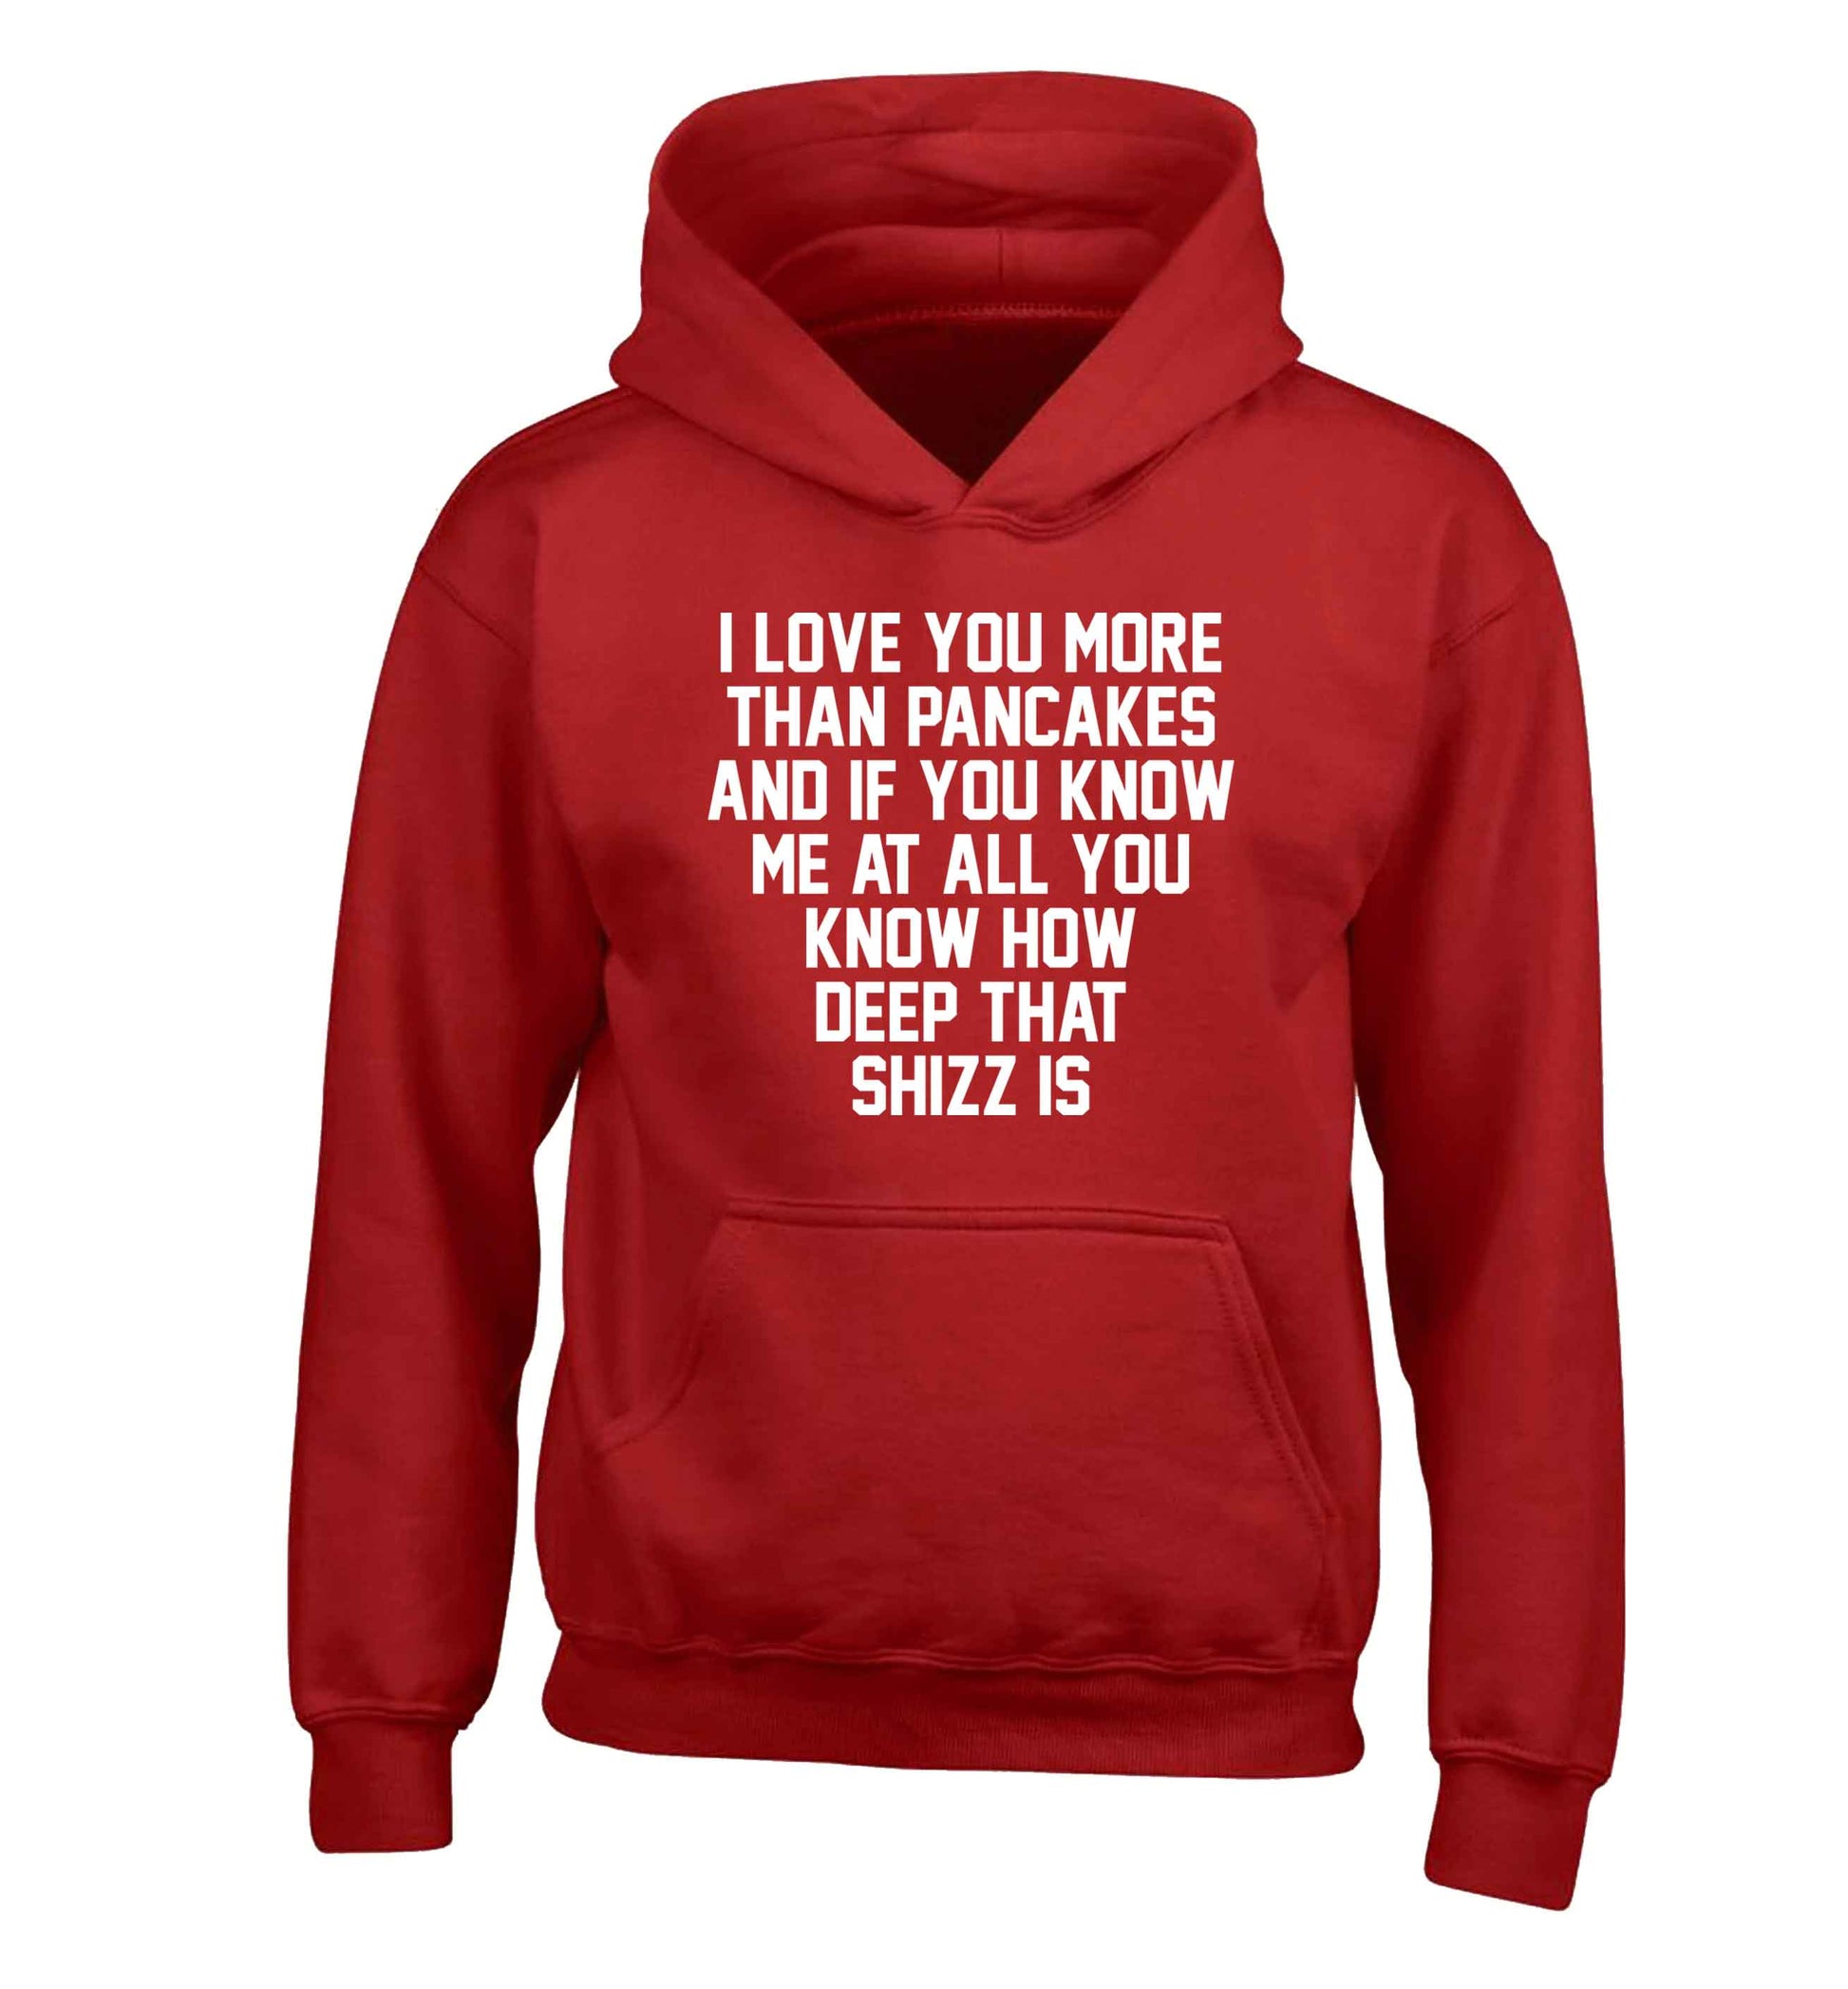 I love you more than pancakes and if you know me at all you know how deep that shizz is children's red hoodie 12-13 Years